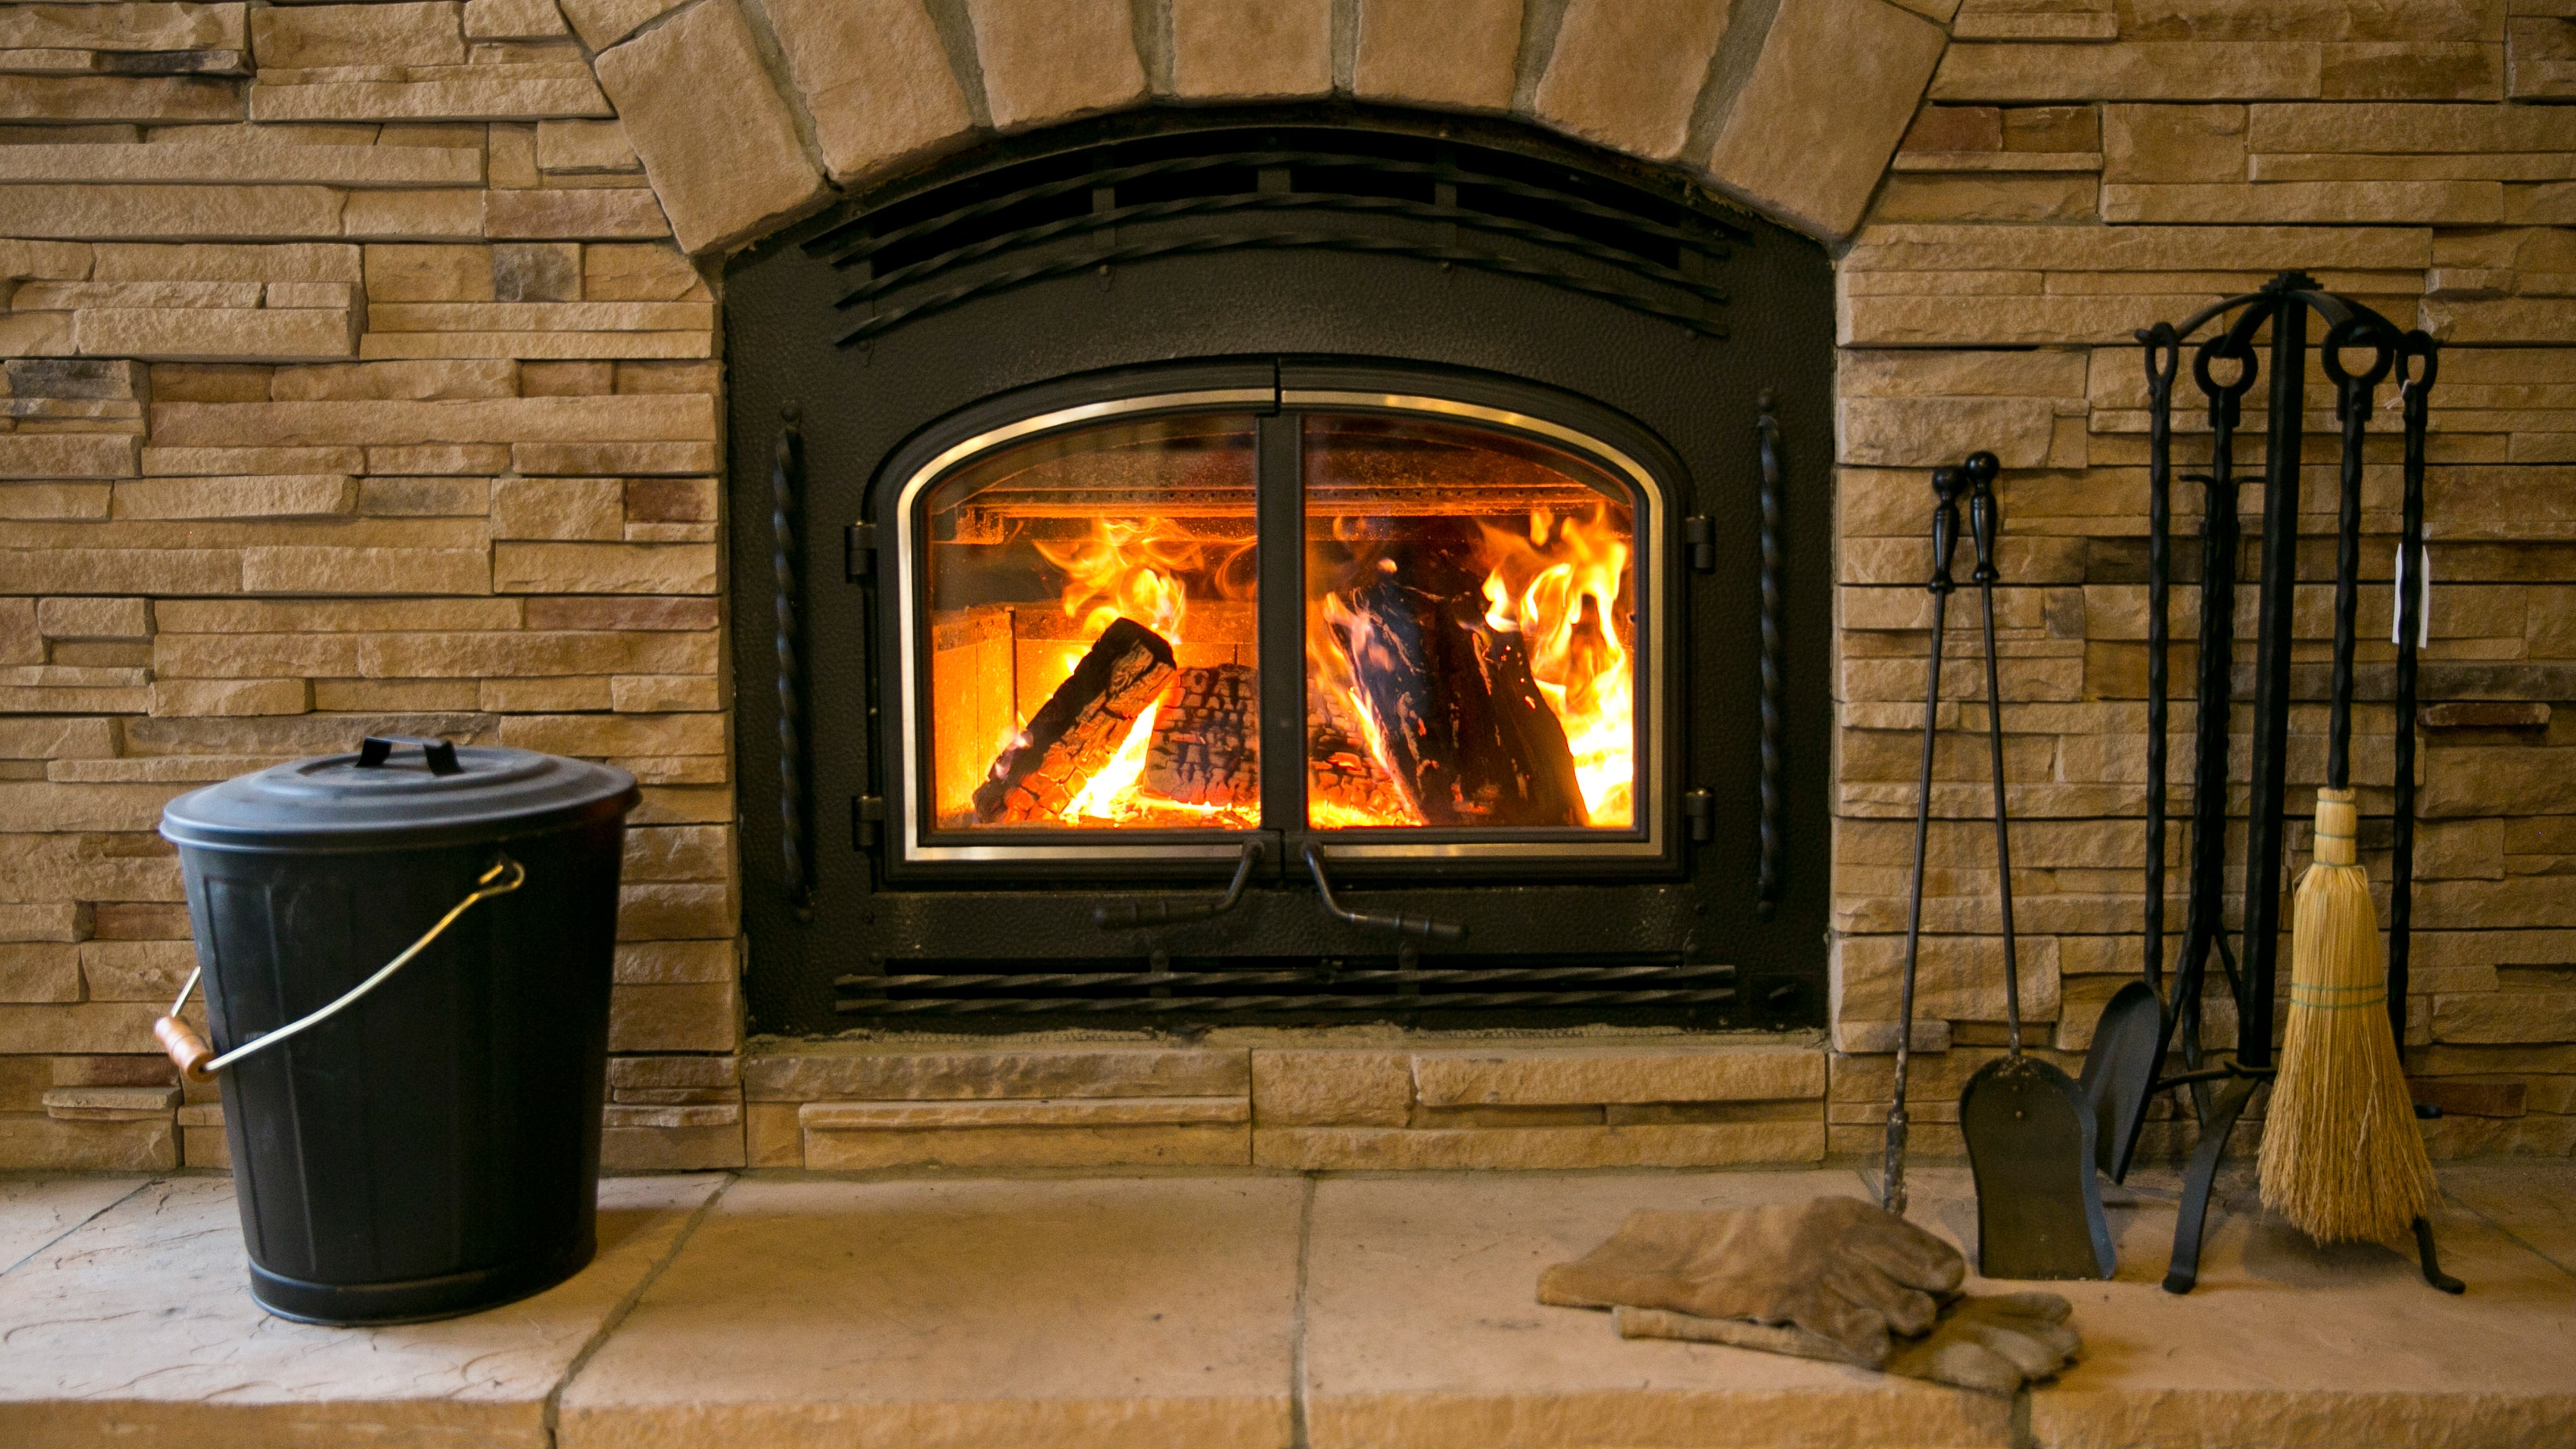 Heat N Glo Fireplace Flame Adjustment Beautiful How to Convert A Gas Fireplace to Wood Burning